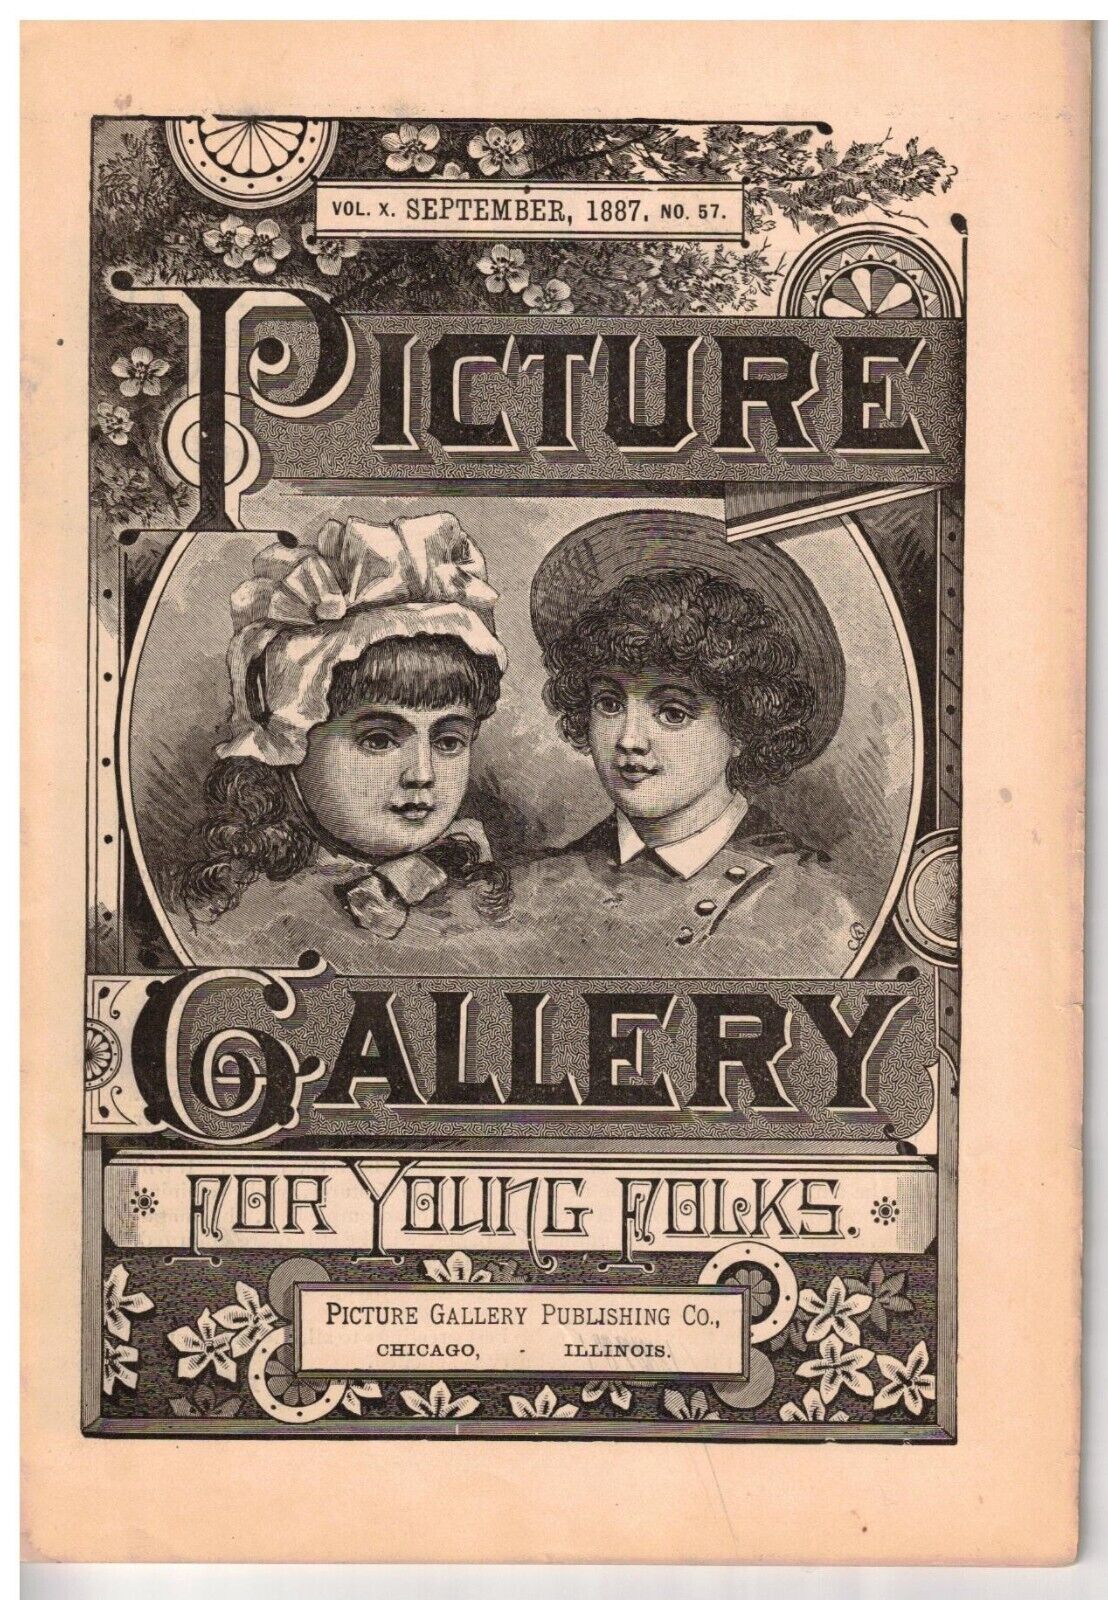 Sept 1887 issue of Picture Gallery Magazine for Young Folks